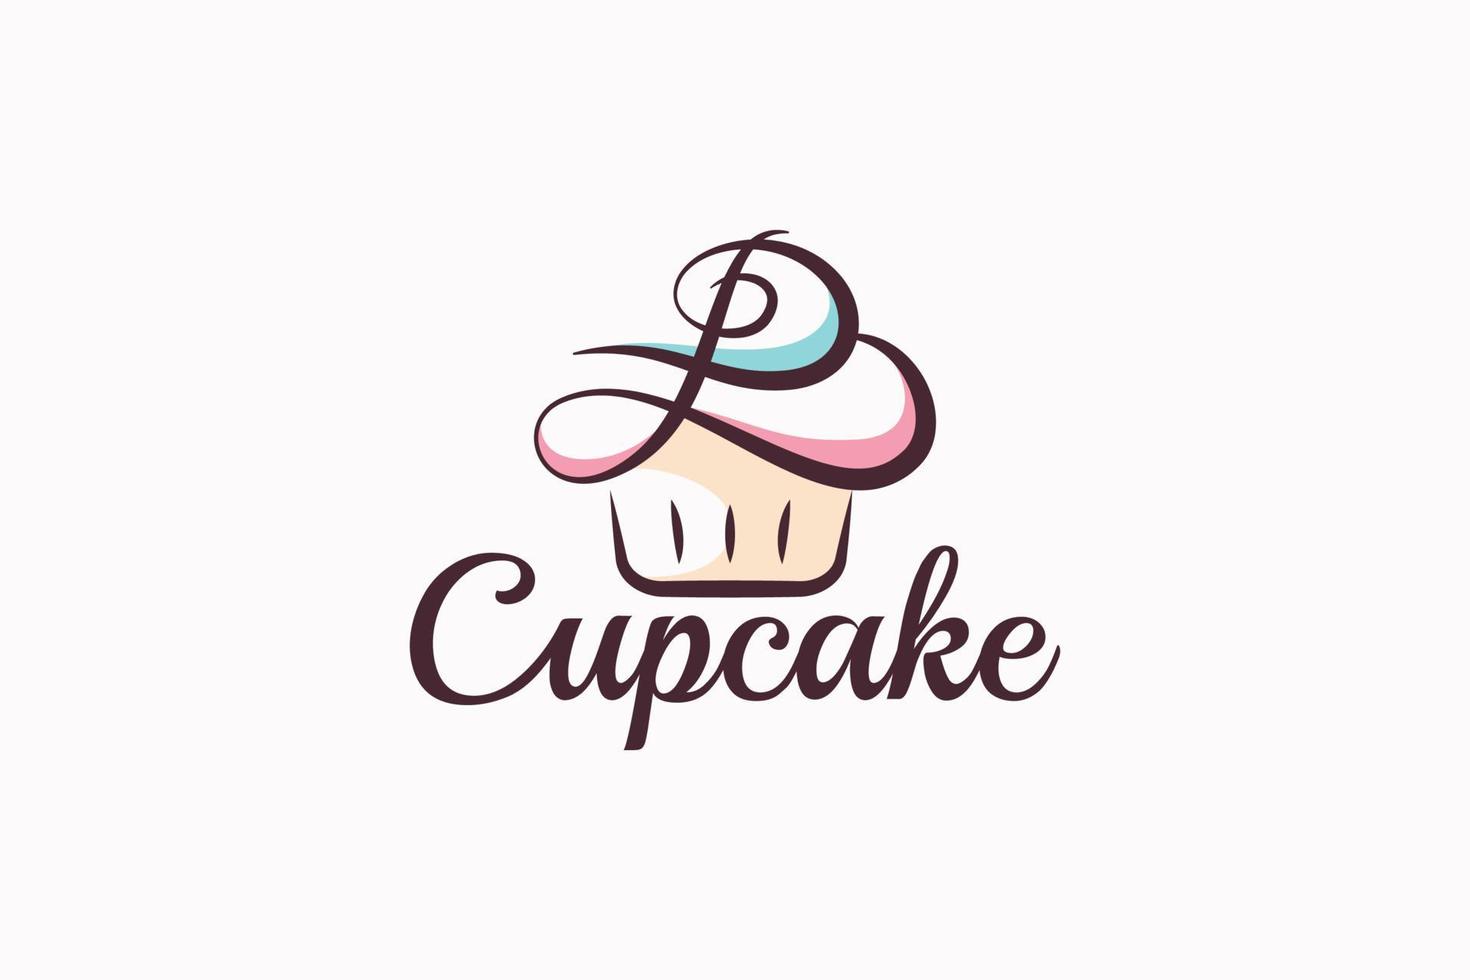 B cupcake logo with a combination of stylist cupcake and letter B for any business, especially for bakeries, cakeries, cafe, etc. vector